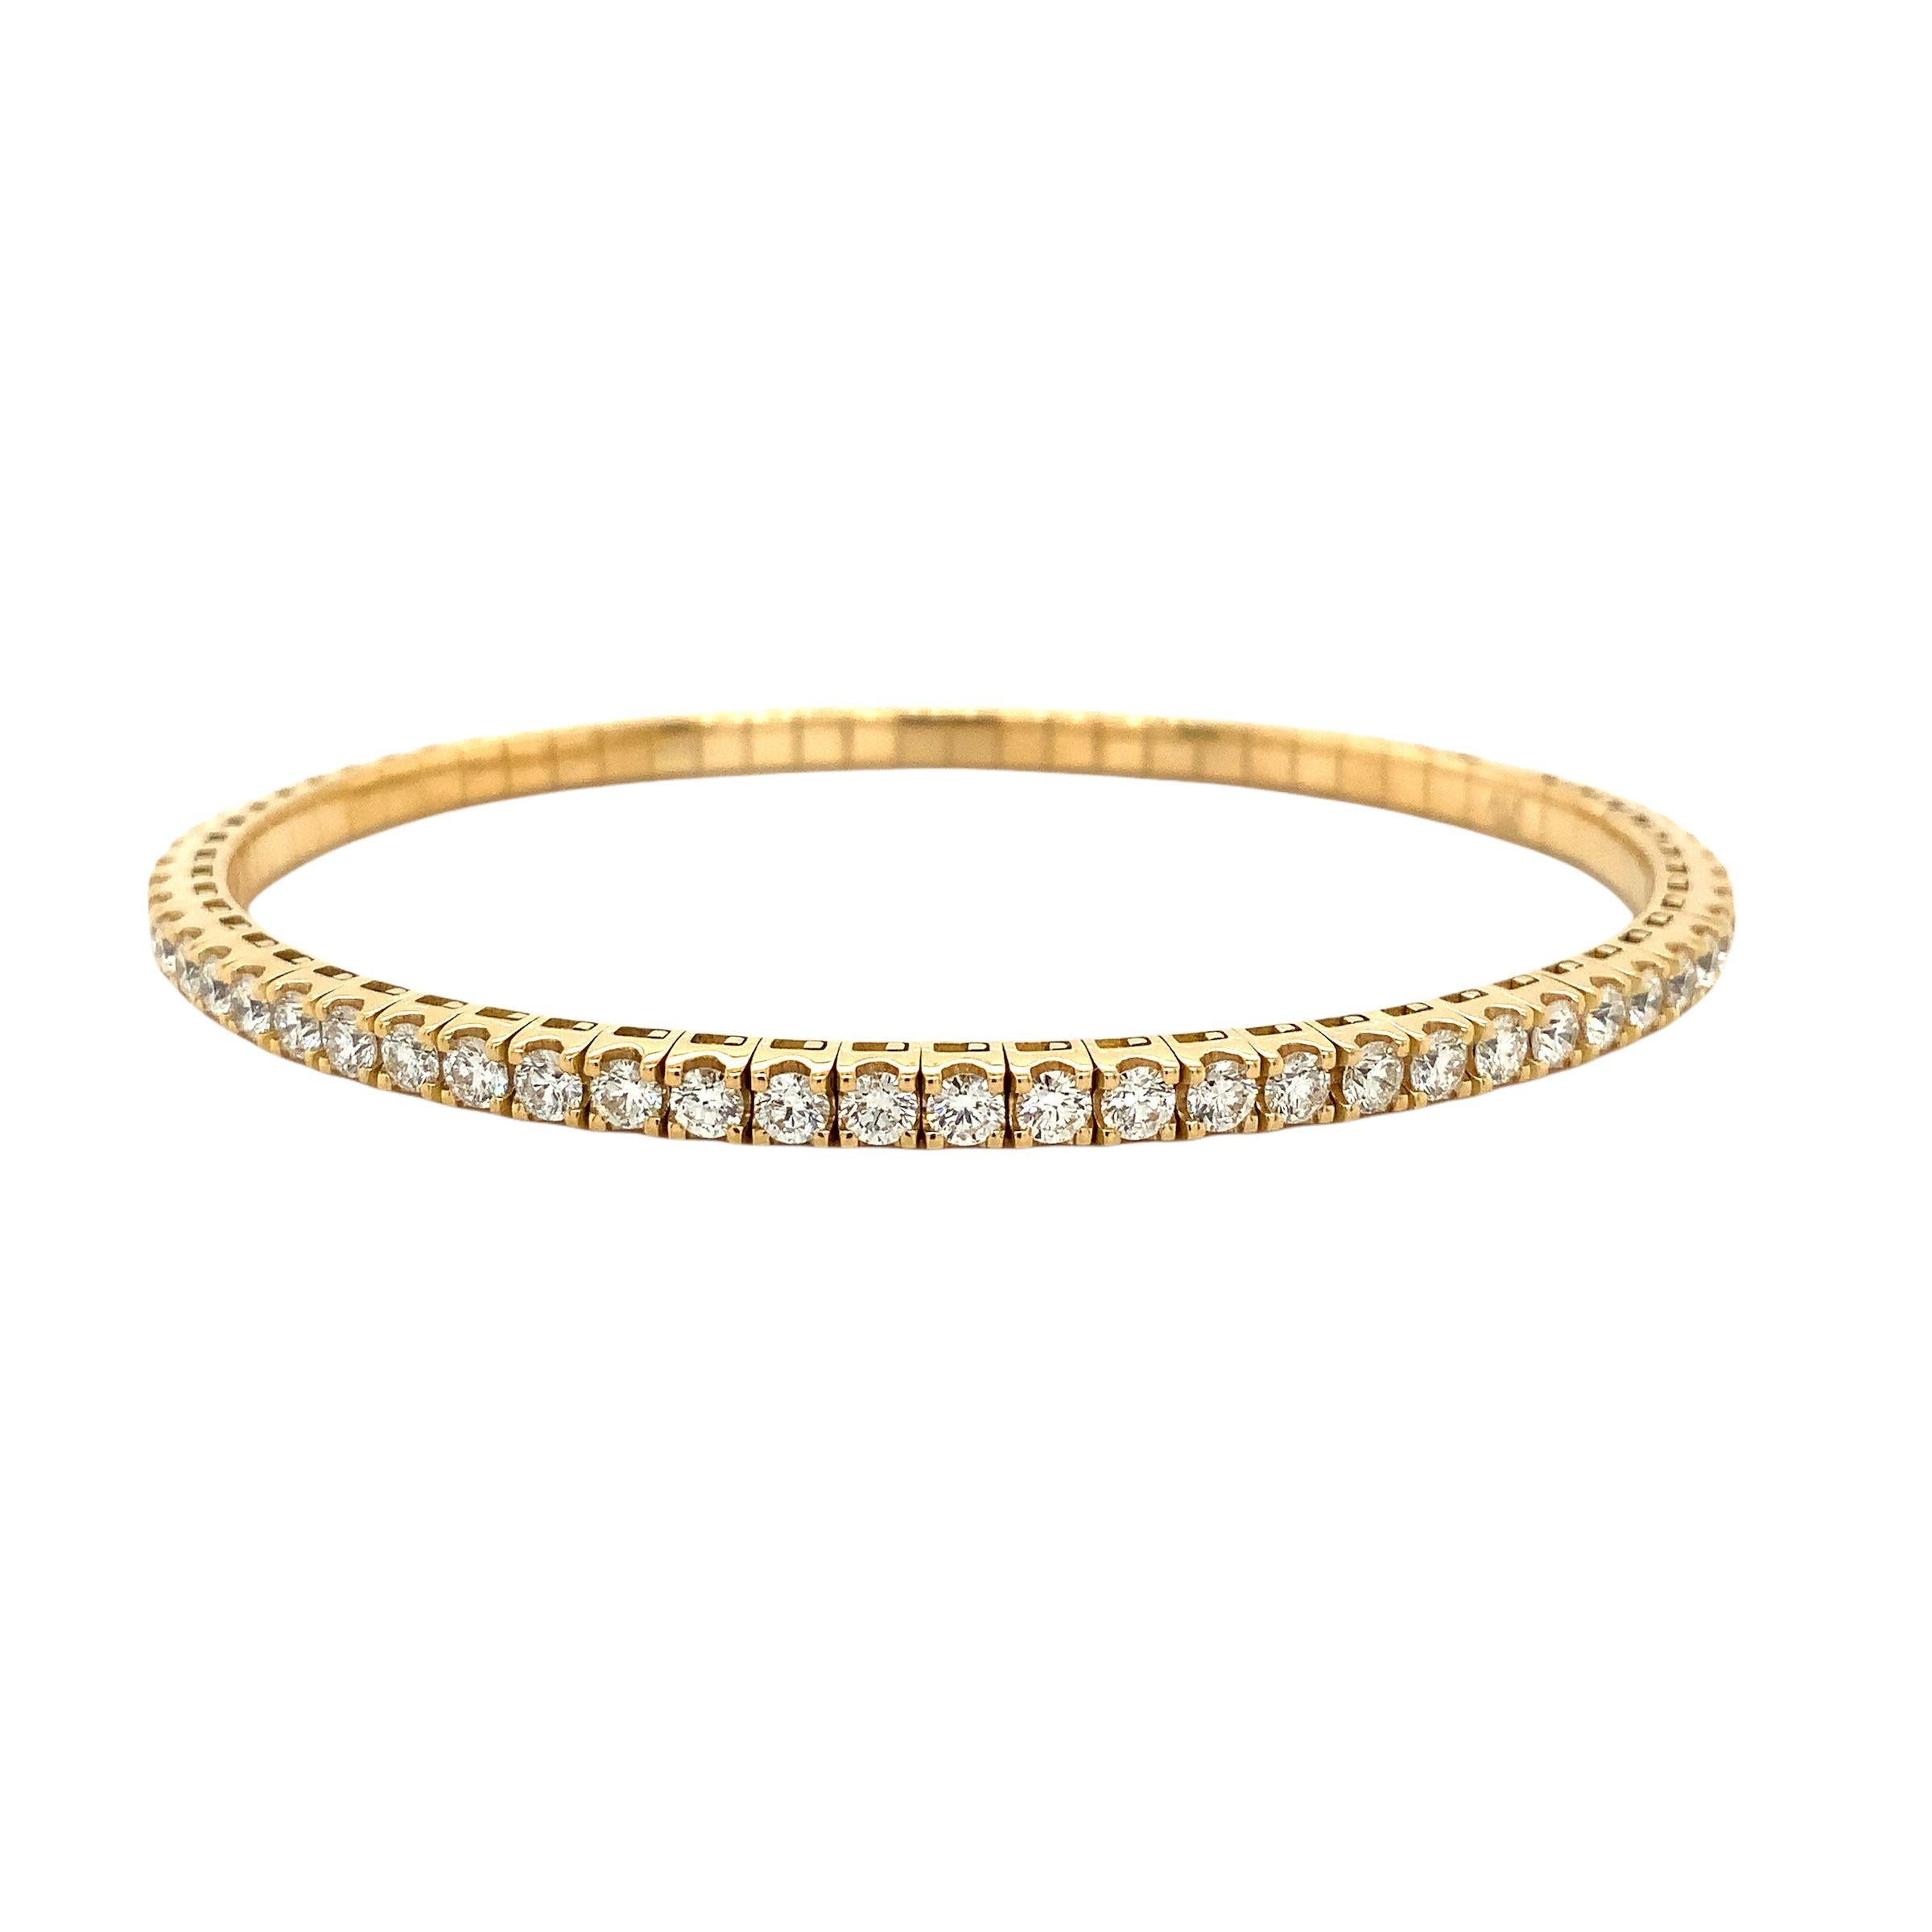 Modern A Link Collection Classic Stretchy Diamond Bracelet 3.44ct Set in 18K Gold For Sale